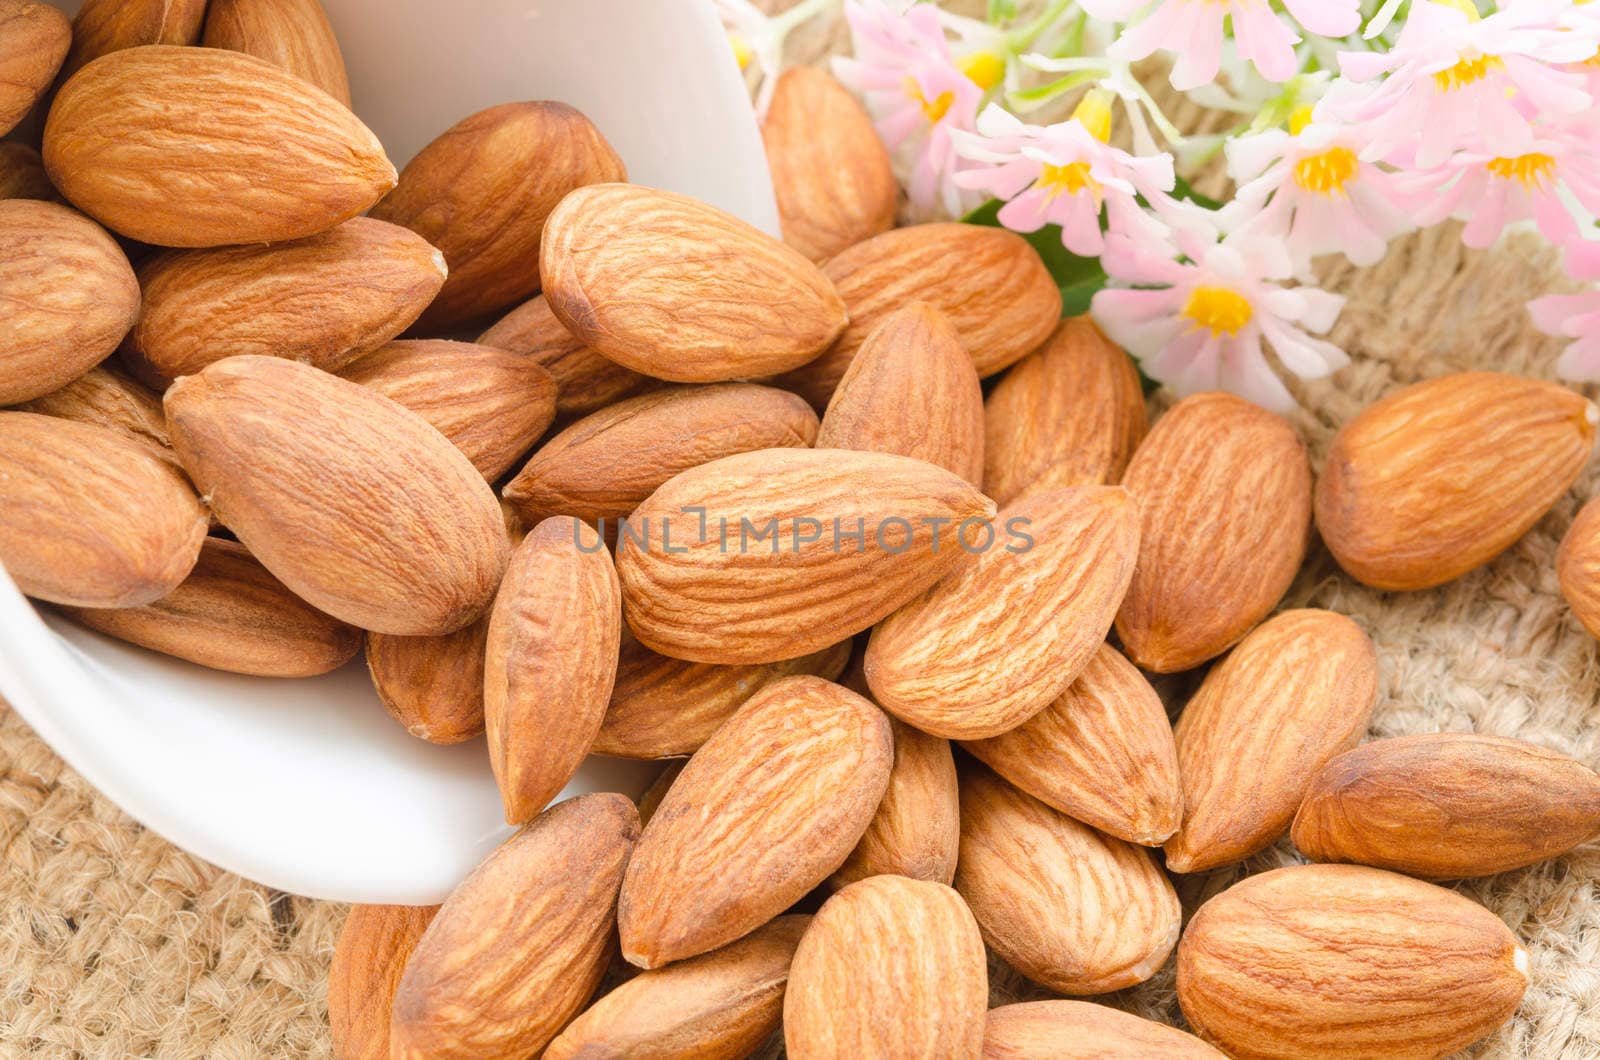 Sweet almonds in white cup with flower on sack background.